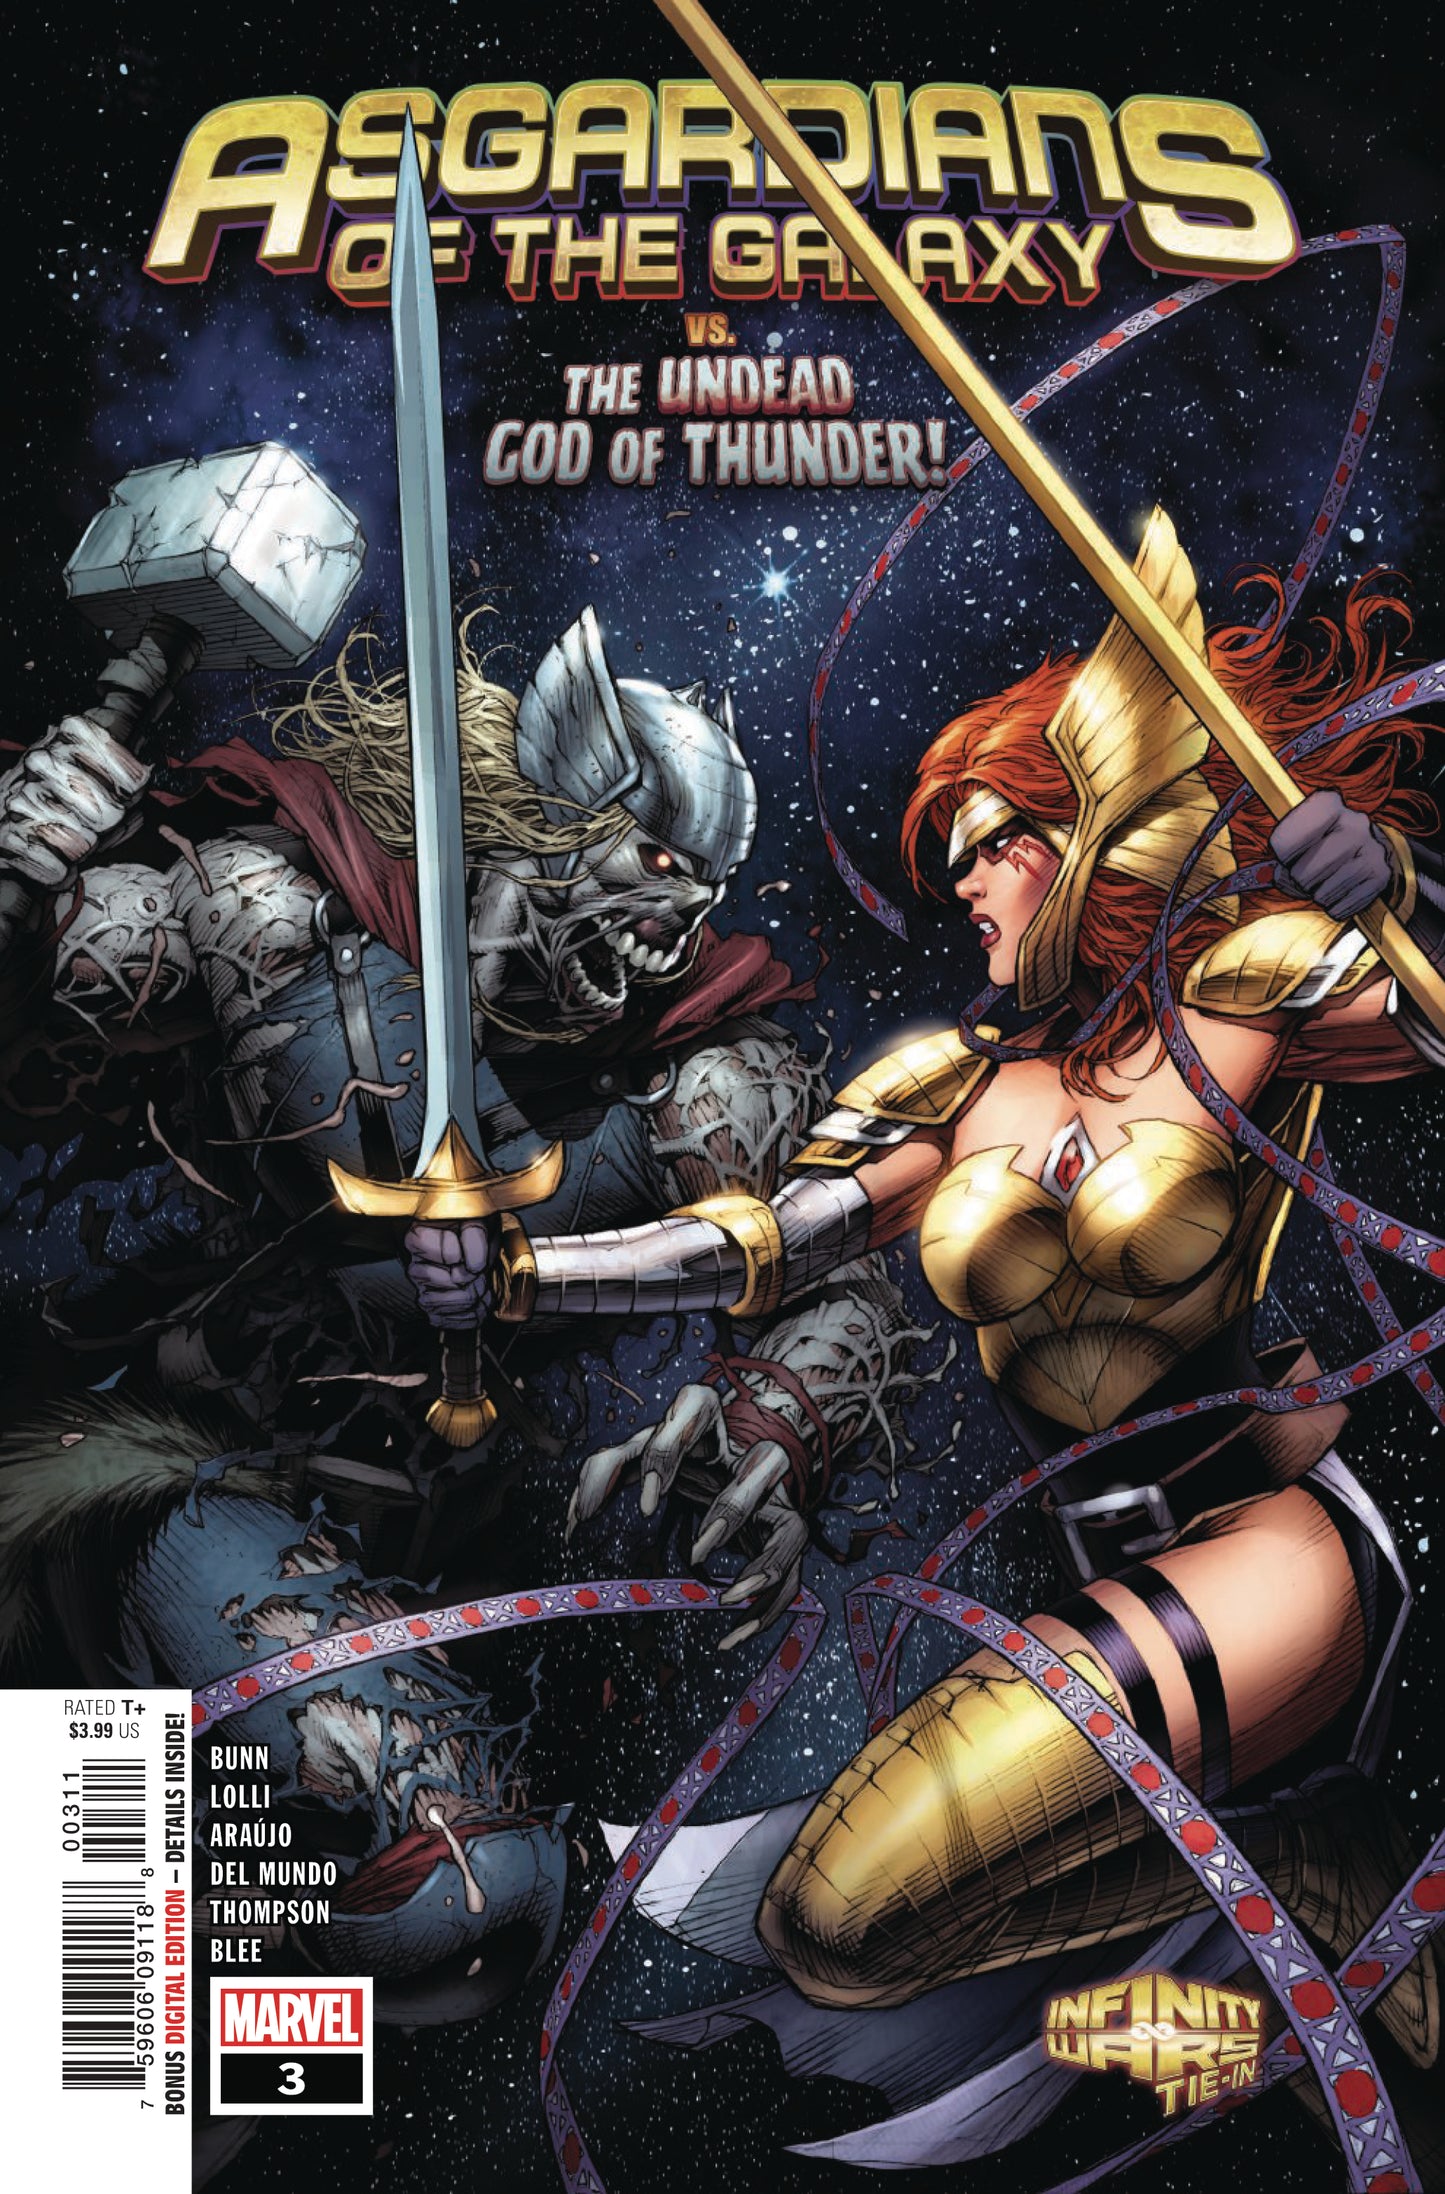 ASGARDIANS OF THE GALAXY #3 COVER